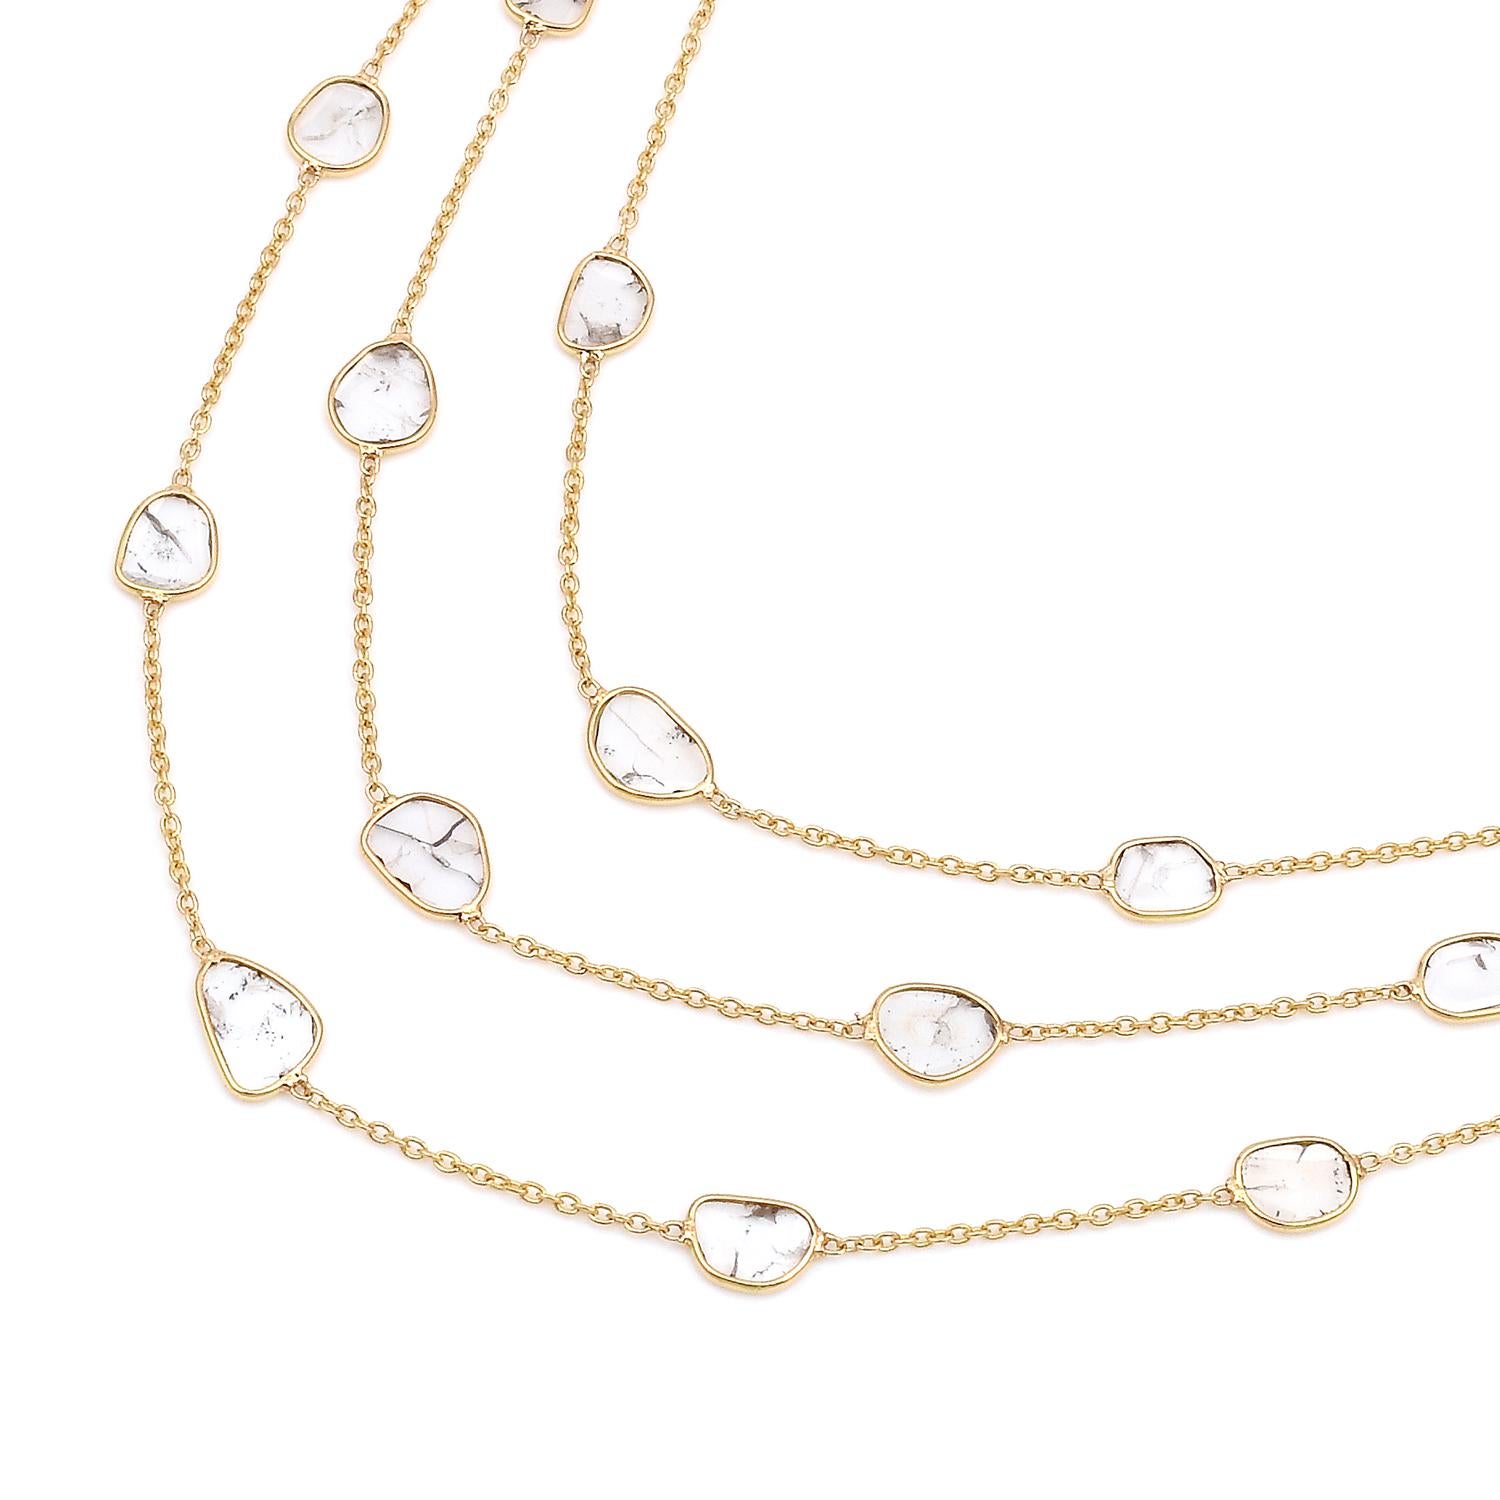 A super stylish and trendy Triple Layer Diamond Slices Necklace made in 18 Karat Yellow Gold. 
Total Weight: 4.06 grams. 